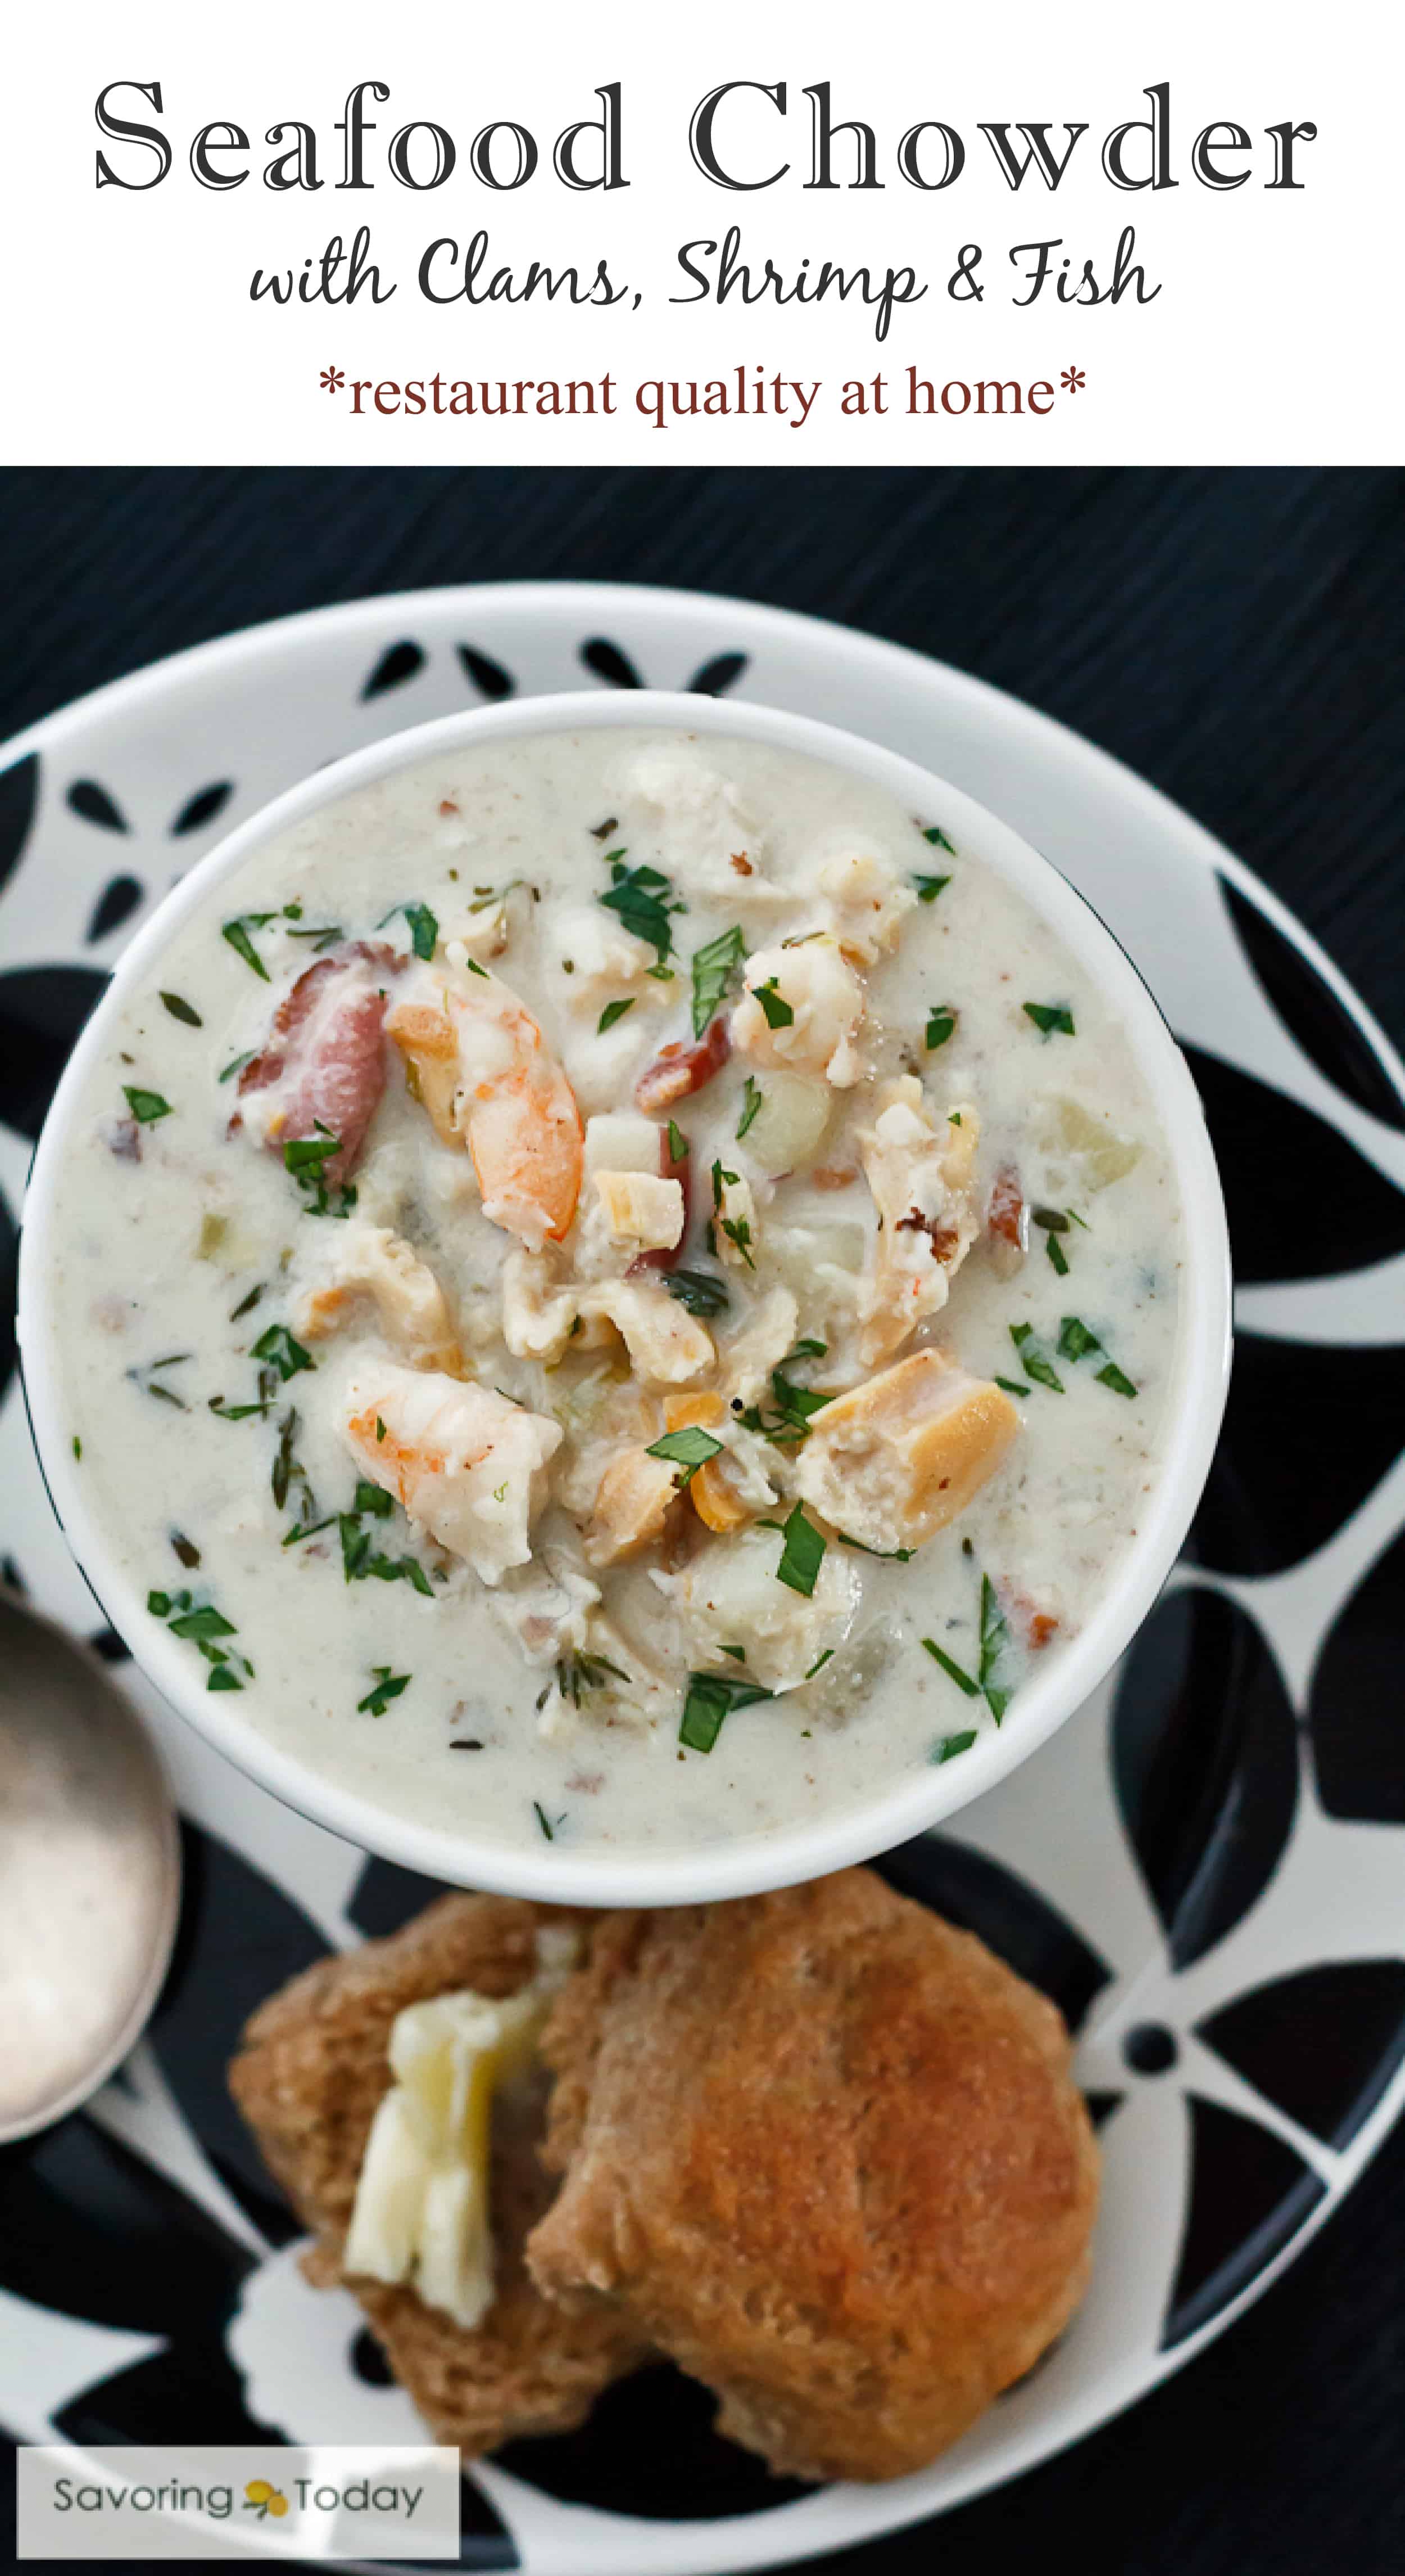 Seafood Chowder Recipe with Clams, Shrimp & Fish